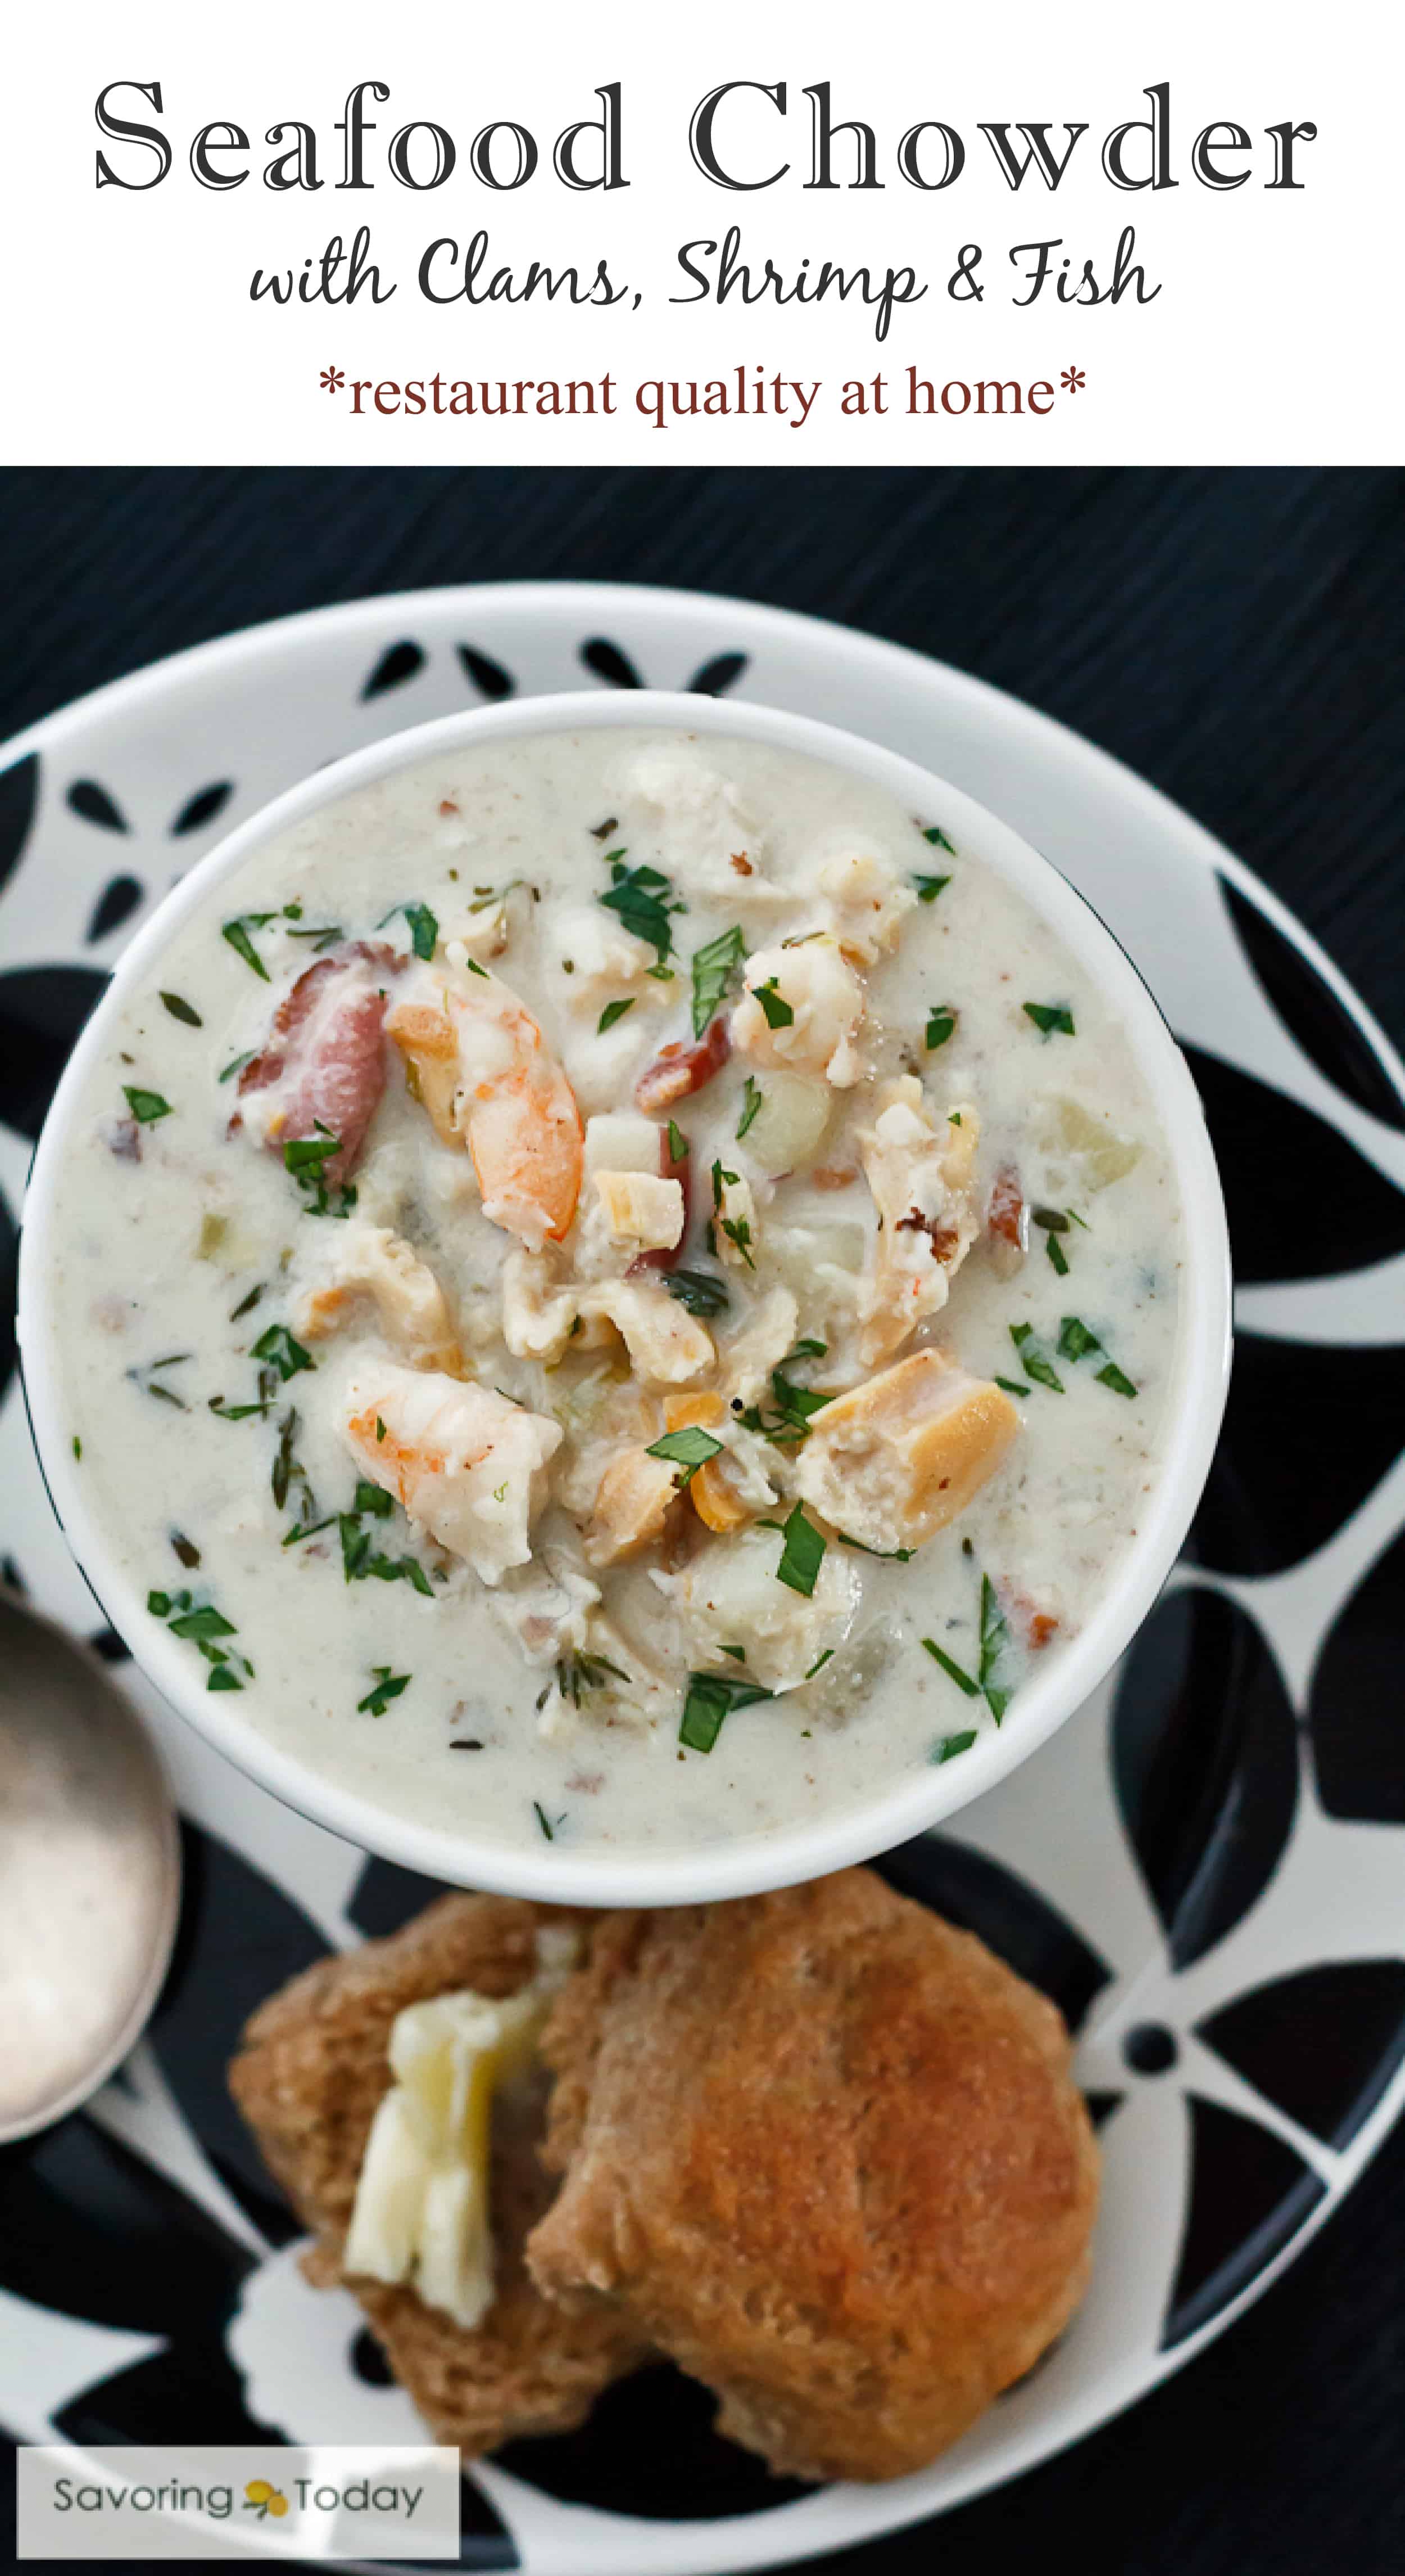 Seafood Chowder Recipe with Clams, Shrimp & Fish